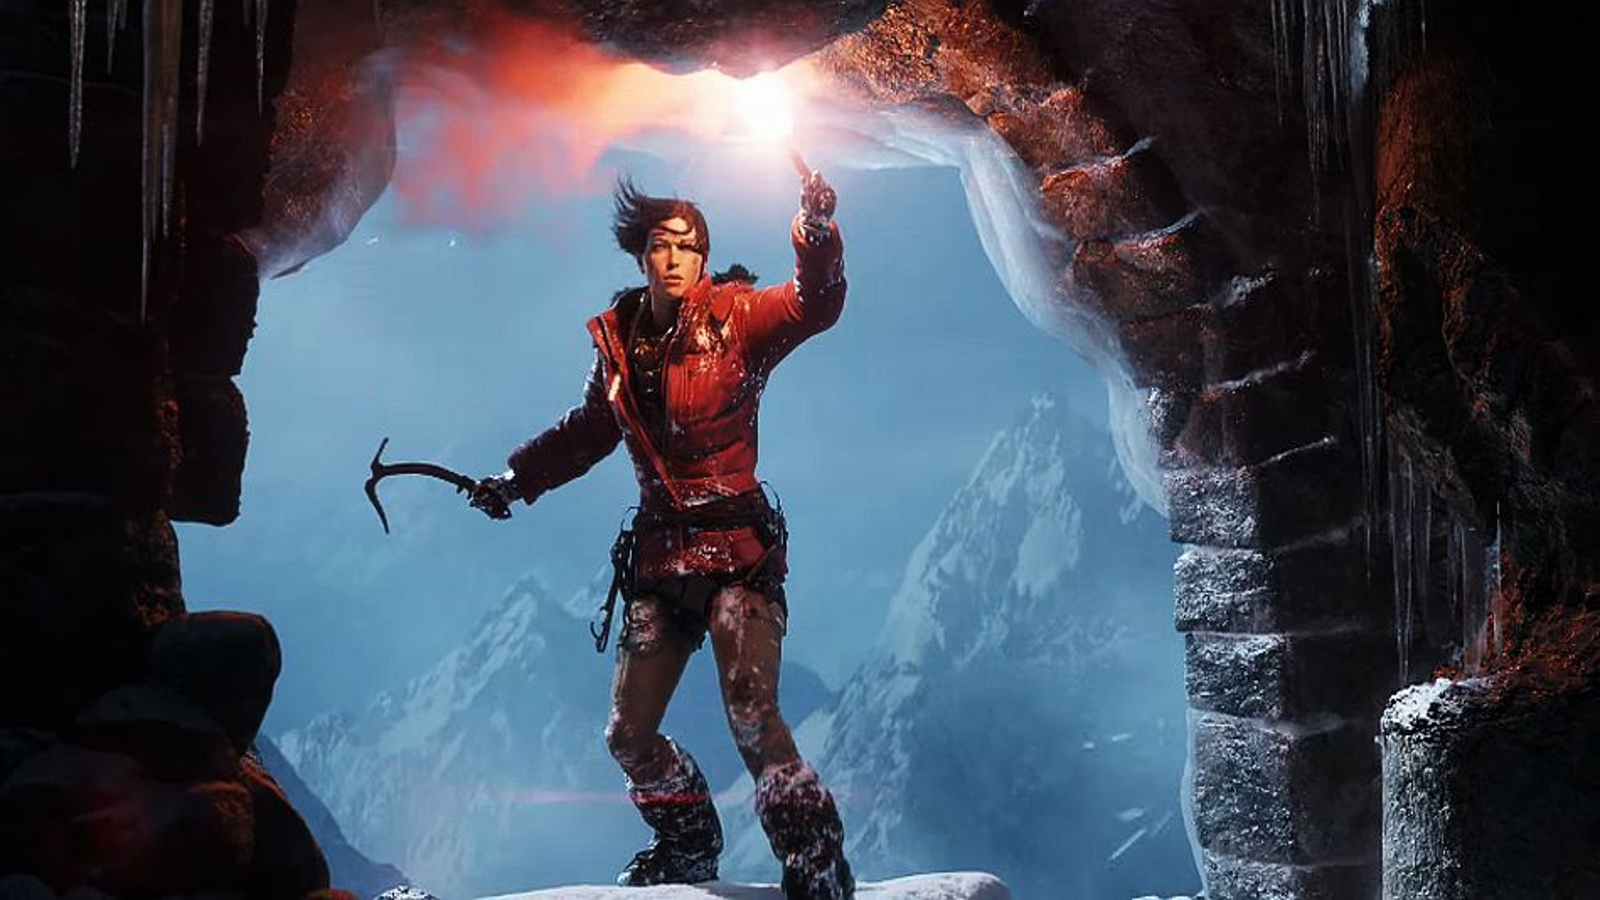 Rise of the Tomb Raider Walkthrough Part 1 - The Fall 